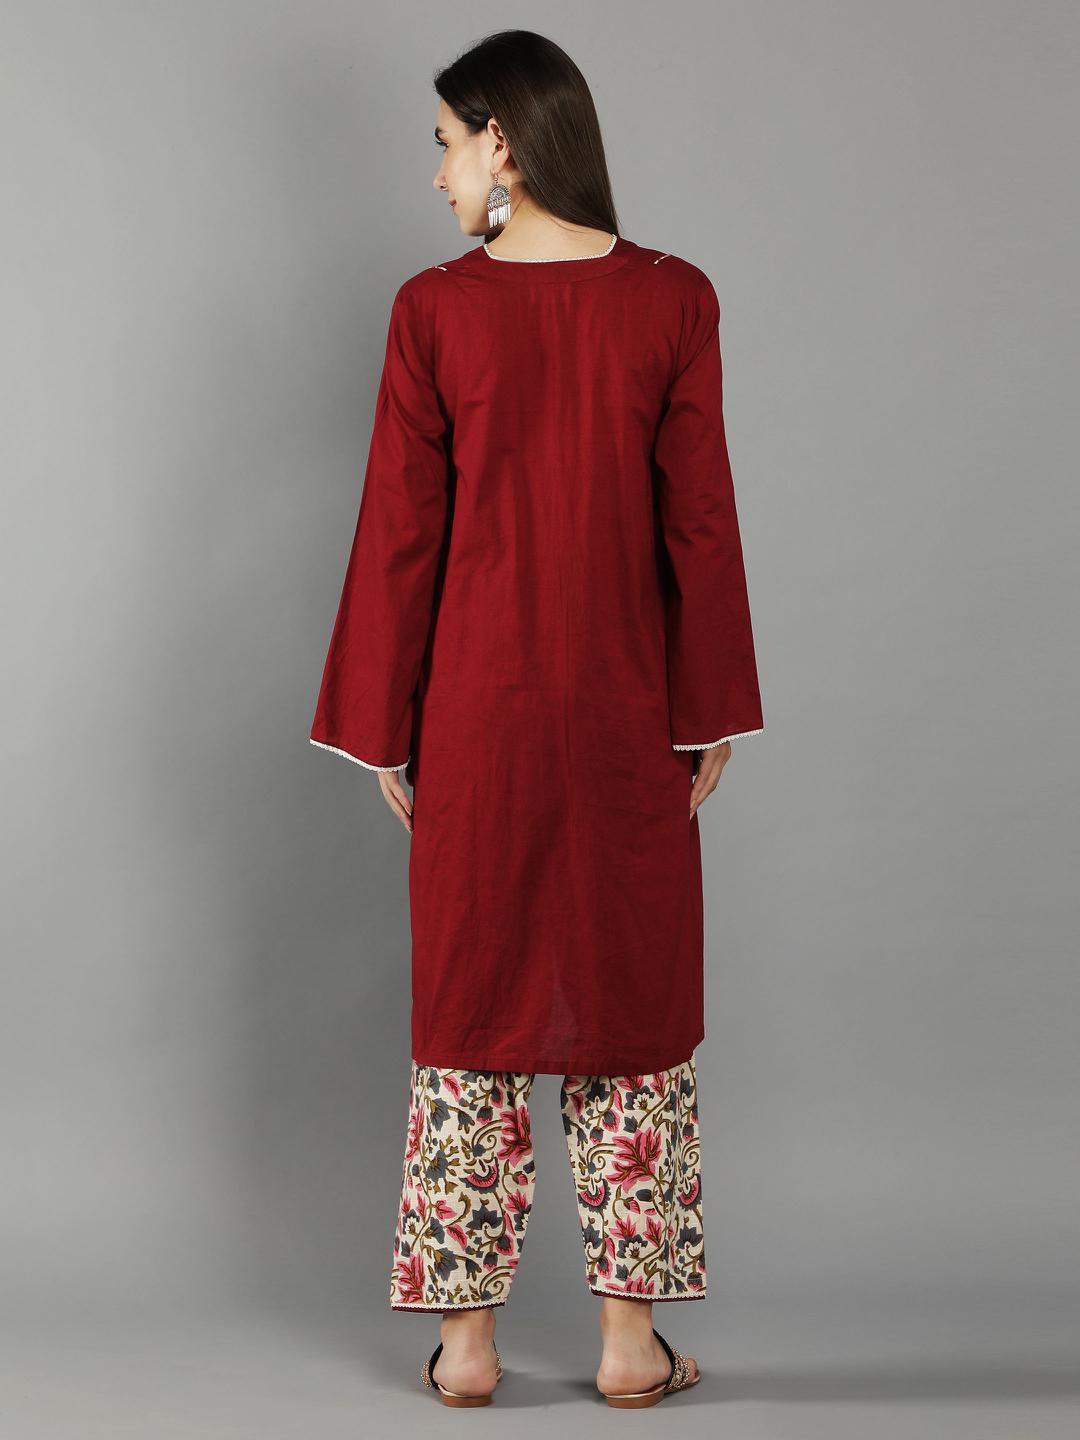 bing-cherry-maroon-v-neck-kurta-in-bell-sleeves-with-straight-pant-11702102WH, Women Indian Ethnic Clothing, Cotton Kurta Set